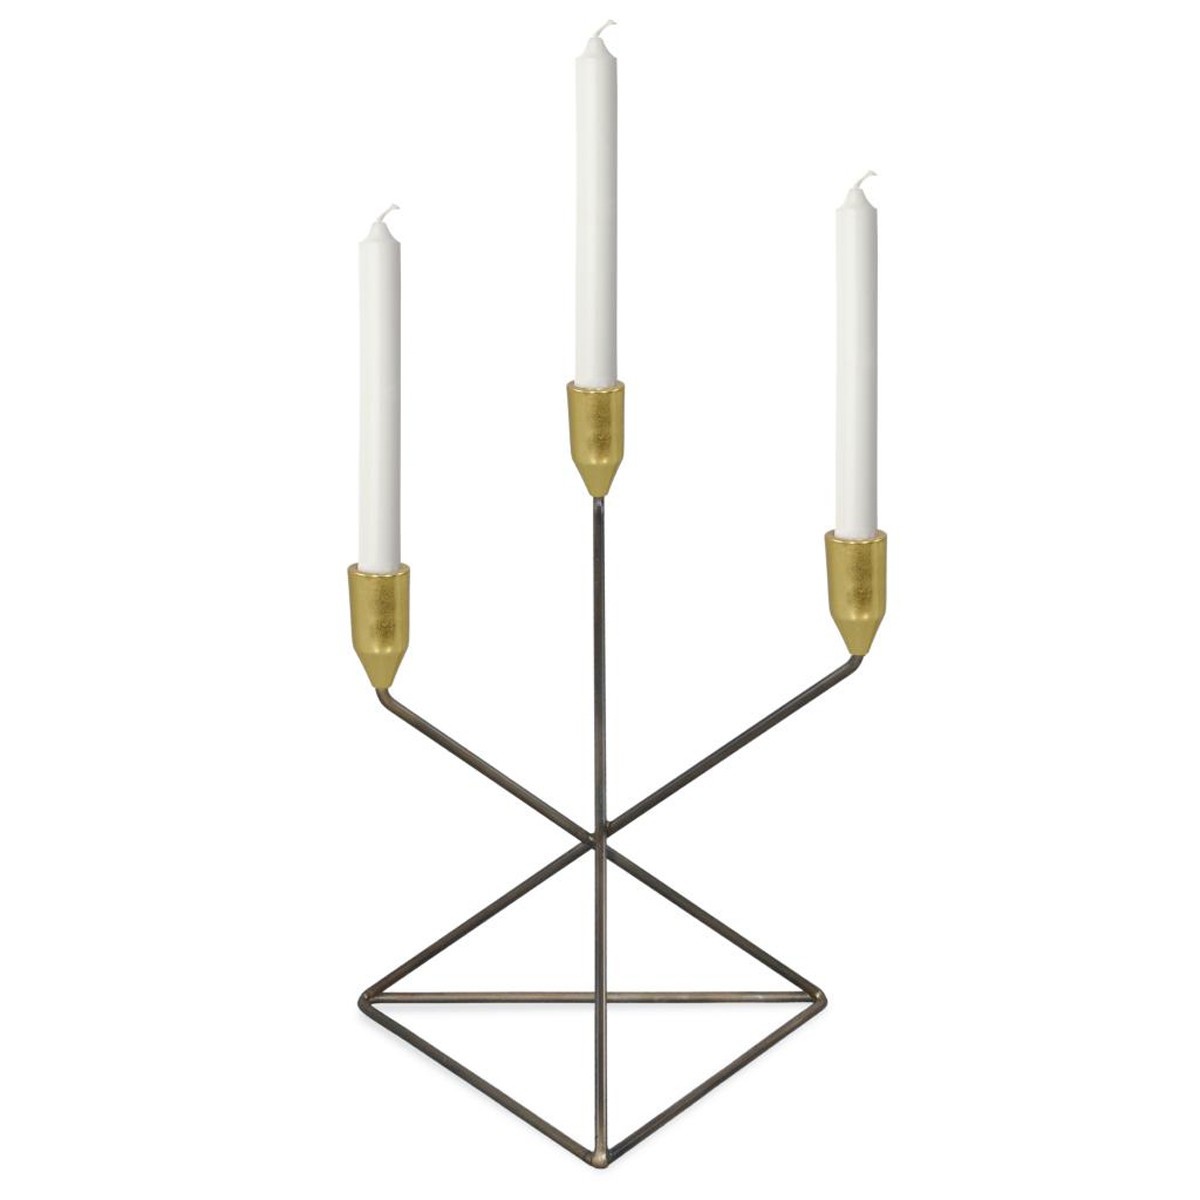 Ren-Wil Evie Candle Holder - Antique Gold